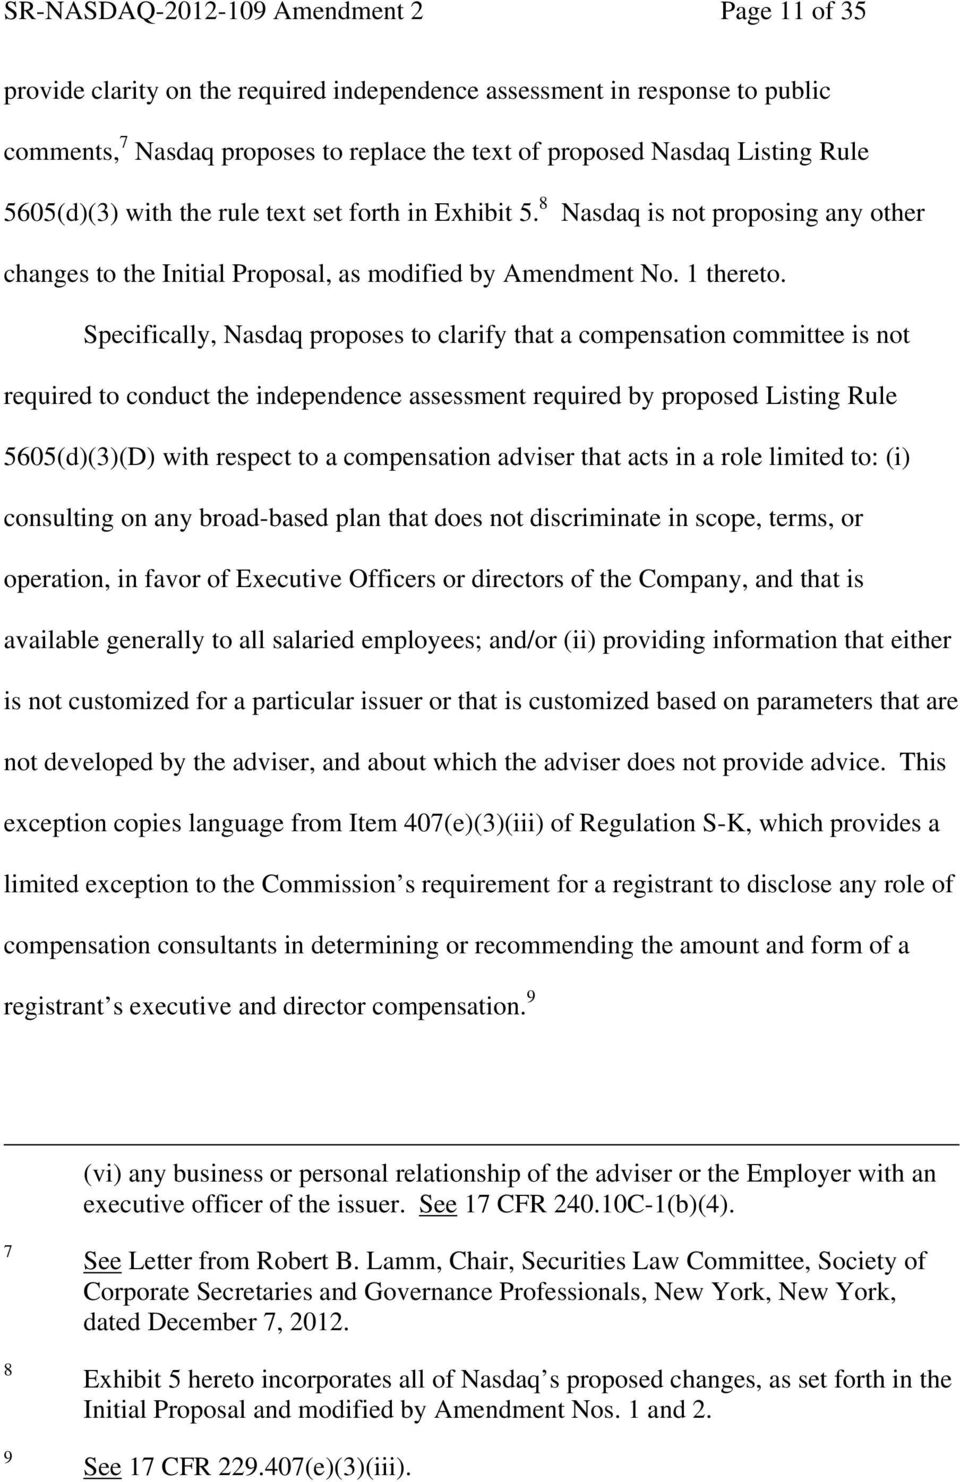 Specifically, Nasdaq proposes to clarify that a compensation committee is not required to conduct the independence assessment required by proposed Listing Rule 5605(d)(3)(D) with respect to a